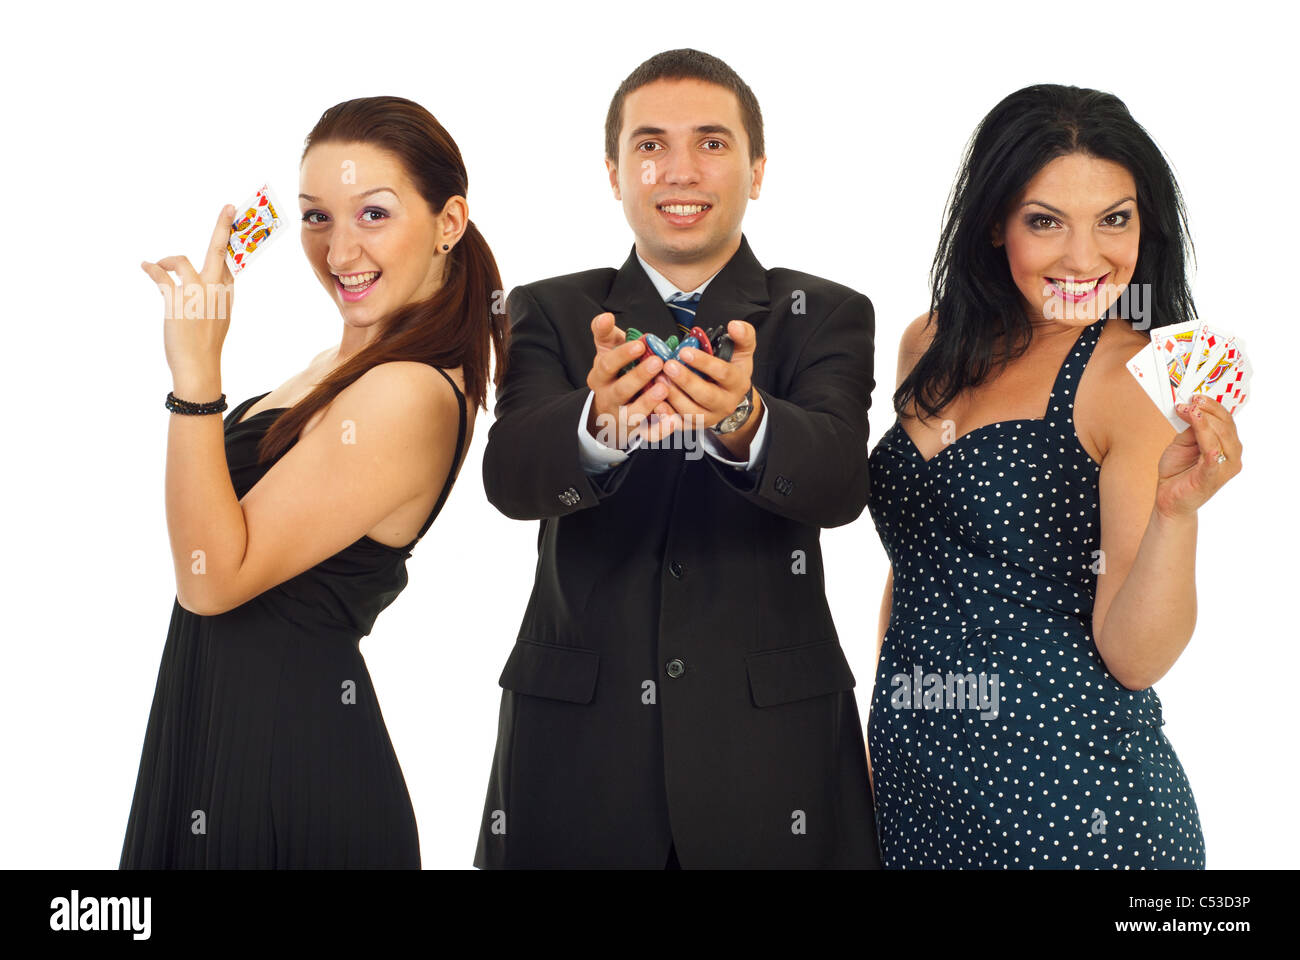 Successful group of three casino gamblers isolated on white background Stock Photo